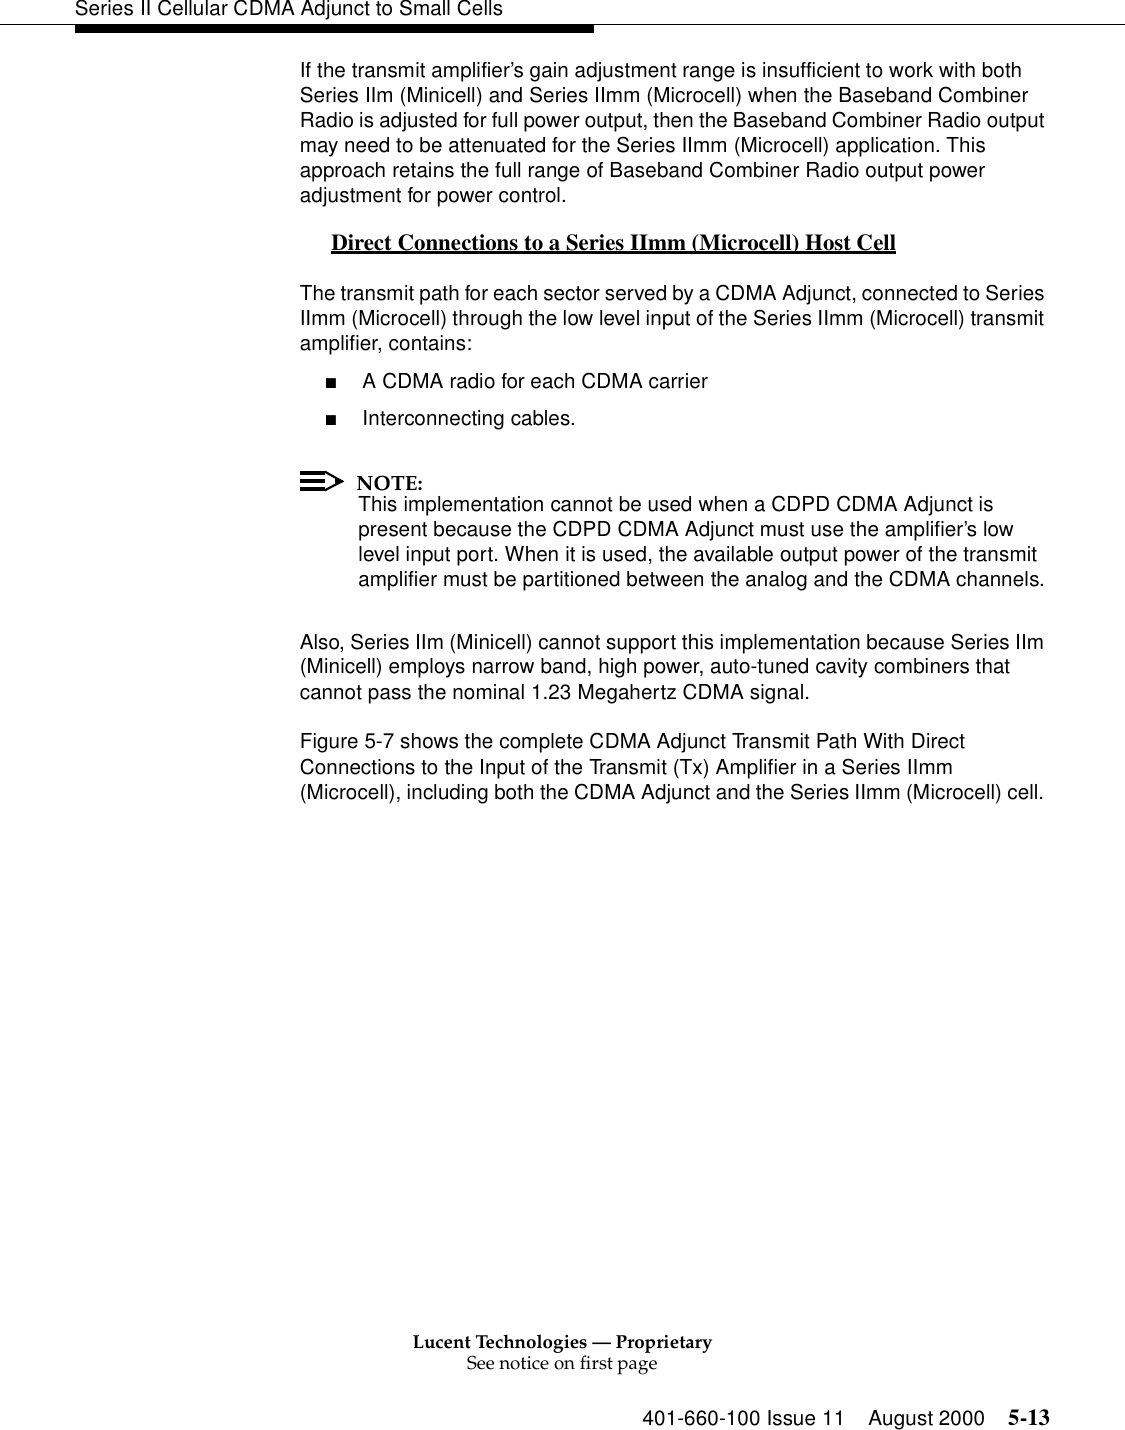 Lucent Technologies — ProprietarySee notice on first page401-660-100 Issue 11 August 2000 5-13Series II Cellular CDMA Adjunct to Small CellsIf the transmit amplifier’s gain adjustment range is insufficient to work with both Series IIm (Minicell) and Series IImm (Microcell) when the Baseband Combiner Radio is adjusted for full power output, then the Baseband Combiner Radio output may need to be attenuated for the Series IImm (Microcell) application. This approach retains the full range of Baseband Combiner Radio output power adjustment for power control.Direct Connections to a Series IImm (Microcell) Host Cell 0The transmit path for each sector served by a CDMA Adjunct, connected to Series IImm (Microcell) through the low level input of the Series IImm (Microcell) transmit amplifier, contains:■A CDMA radio for each CDMA carrier■Interconnecting cables. NOTE:This implementation cannot be used when a CDPD CDMA Adjunct is present because the CDPD CDMA Adjunct must use the amplifier’s low level input port. When it is used, the available output power of the transmit amplifier must be partitioned between the analog and the CDMA channels.Also, Series IIm (Minicell) cannot support this implementation because Series IIm (Minicell) employs narrow band, high power, auto-tuned cavity combiners that cannot pass the nominal 1.23 Megahertz CDMA signal. Figure 5-7 shows the complete CDMA Adjunct Transmit Path With Direct Connections to the Input of the Transmit (Tx) Amplifier in a Series IImm (Microcell), including both the CDMA Adjunct and the Series IImm (Microcell) cell. 